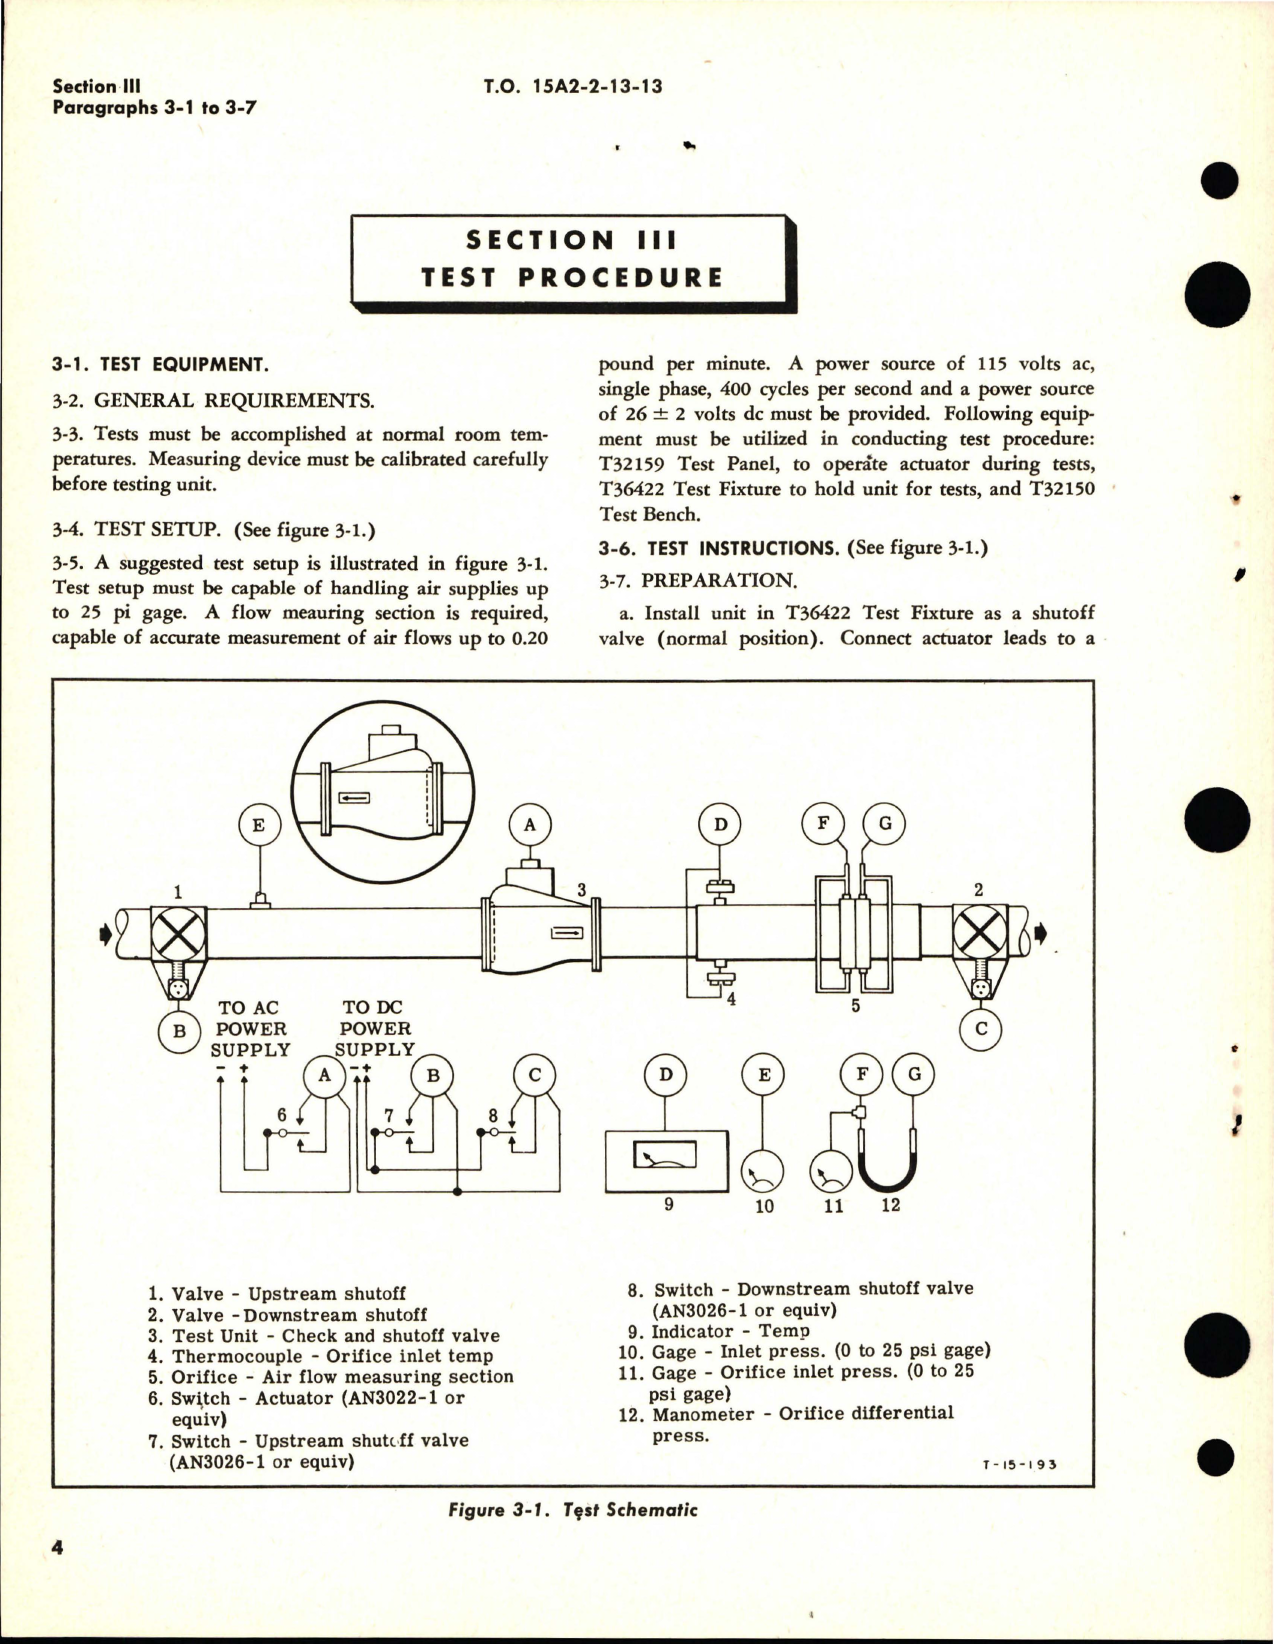 Sample page 6 from AirCorps Library document: Overhaul Instructions for Check and Shutoff Valves